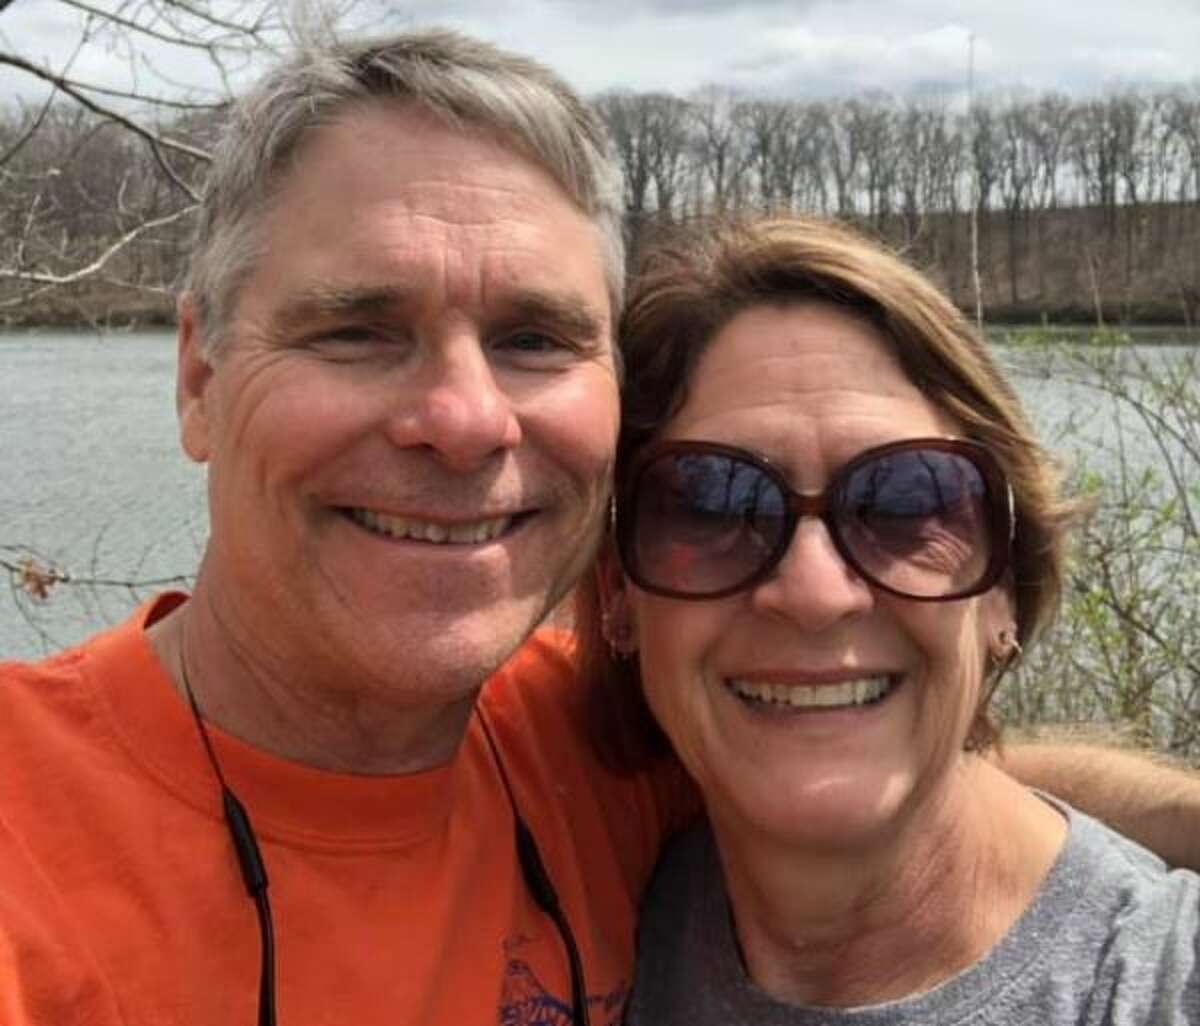 Ken and Cheryl Pfeiffer of Grafton will discuss their 17-month, 4,500-mile sailing voyage April 11 at the Old Bakery Beer Company in Alton.